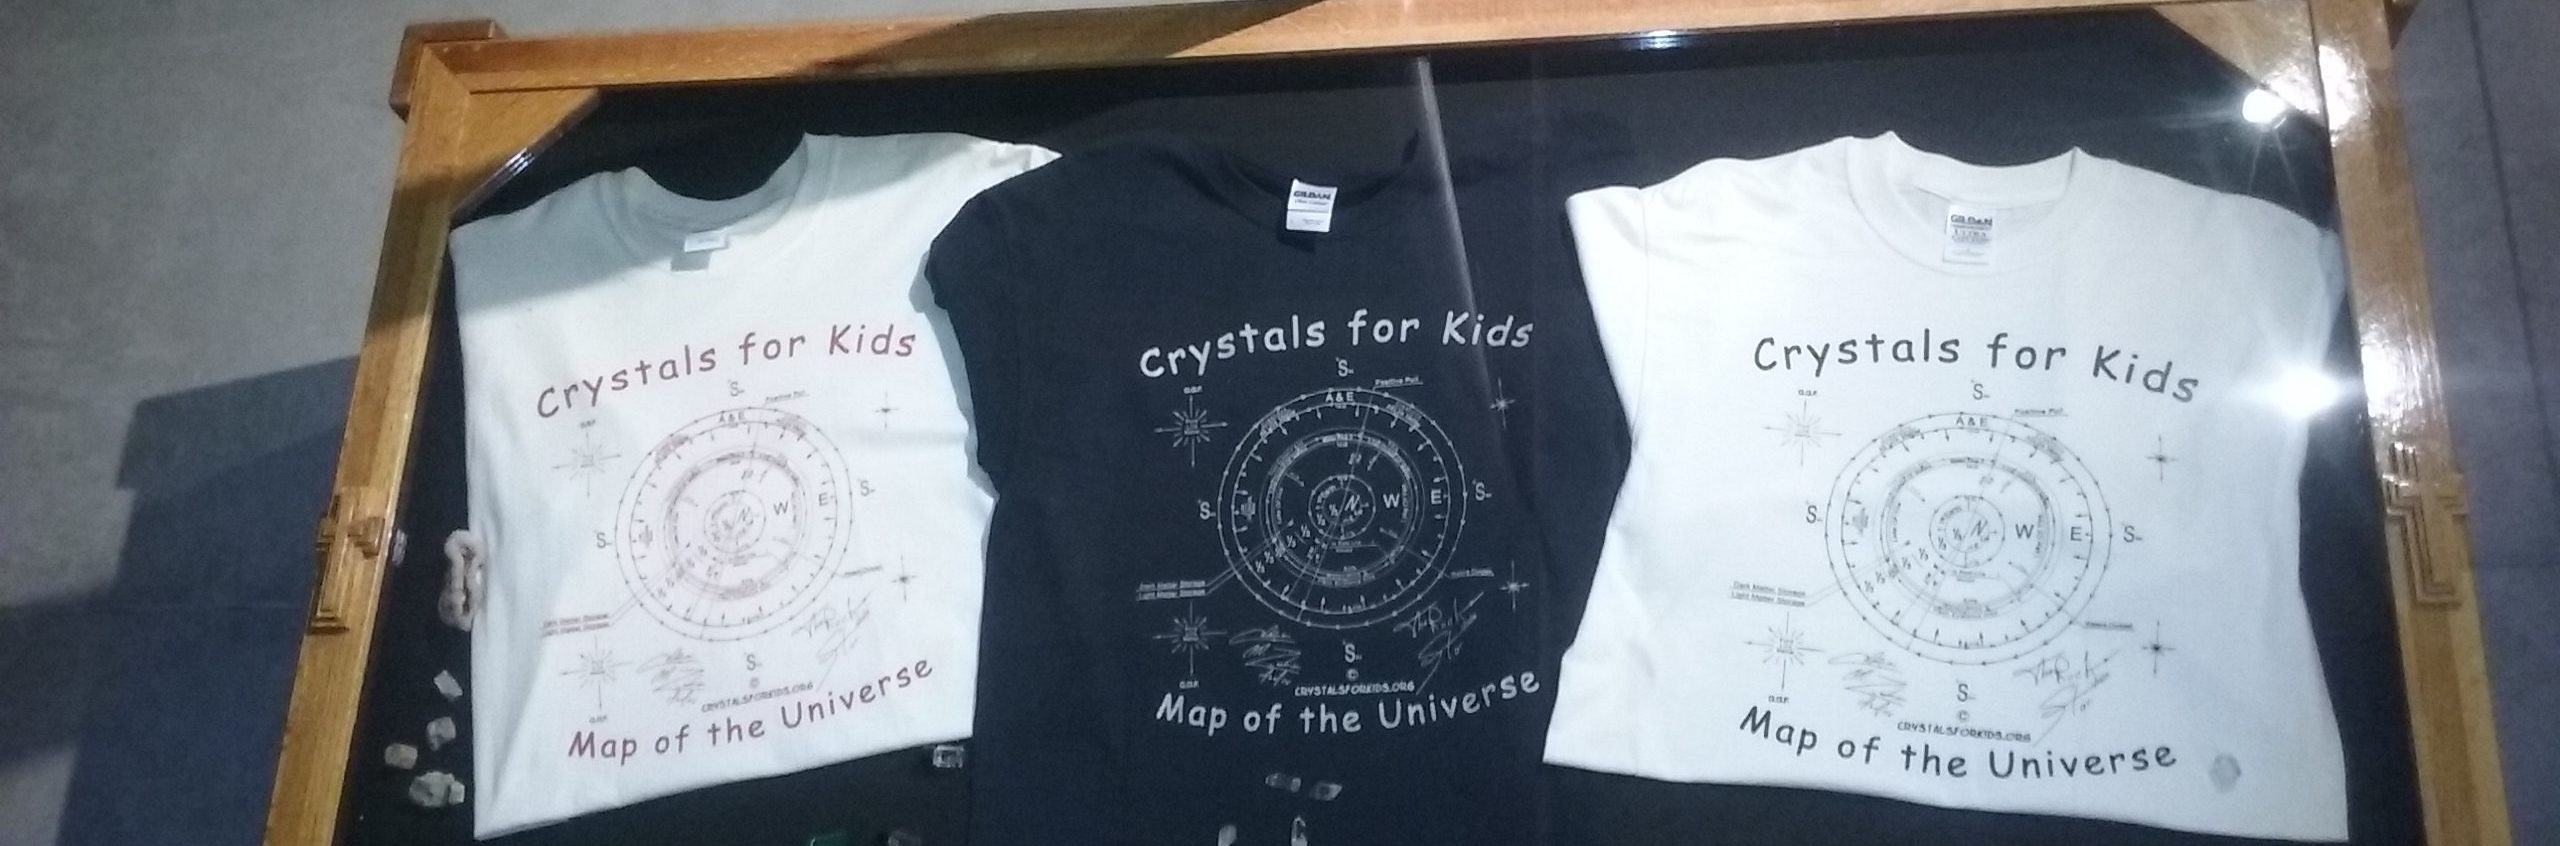 Crystals For Kids Map Of The Universe!